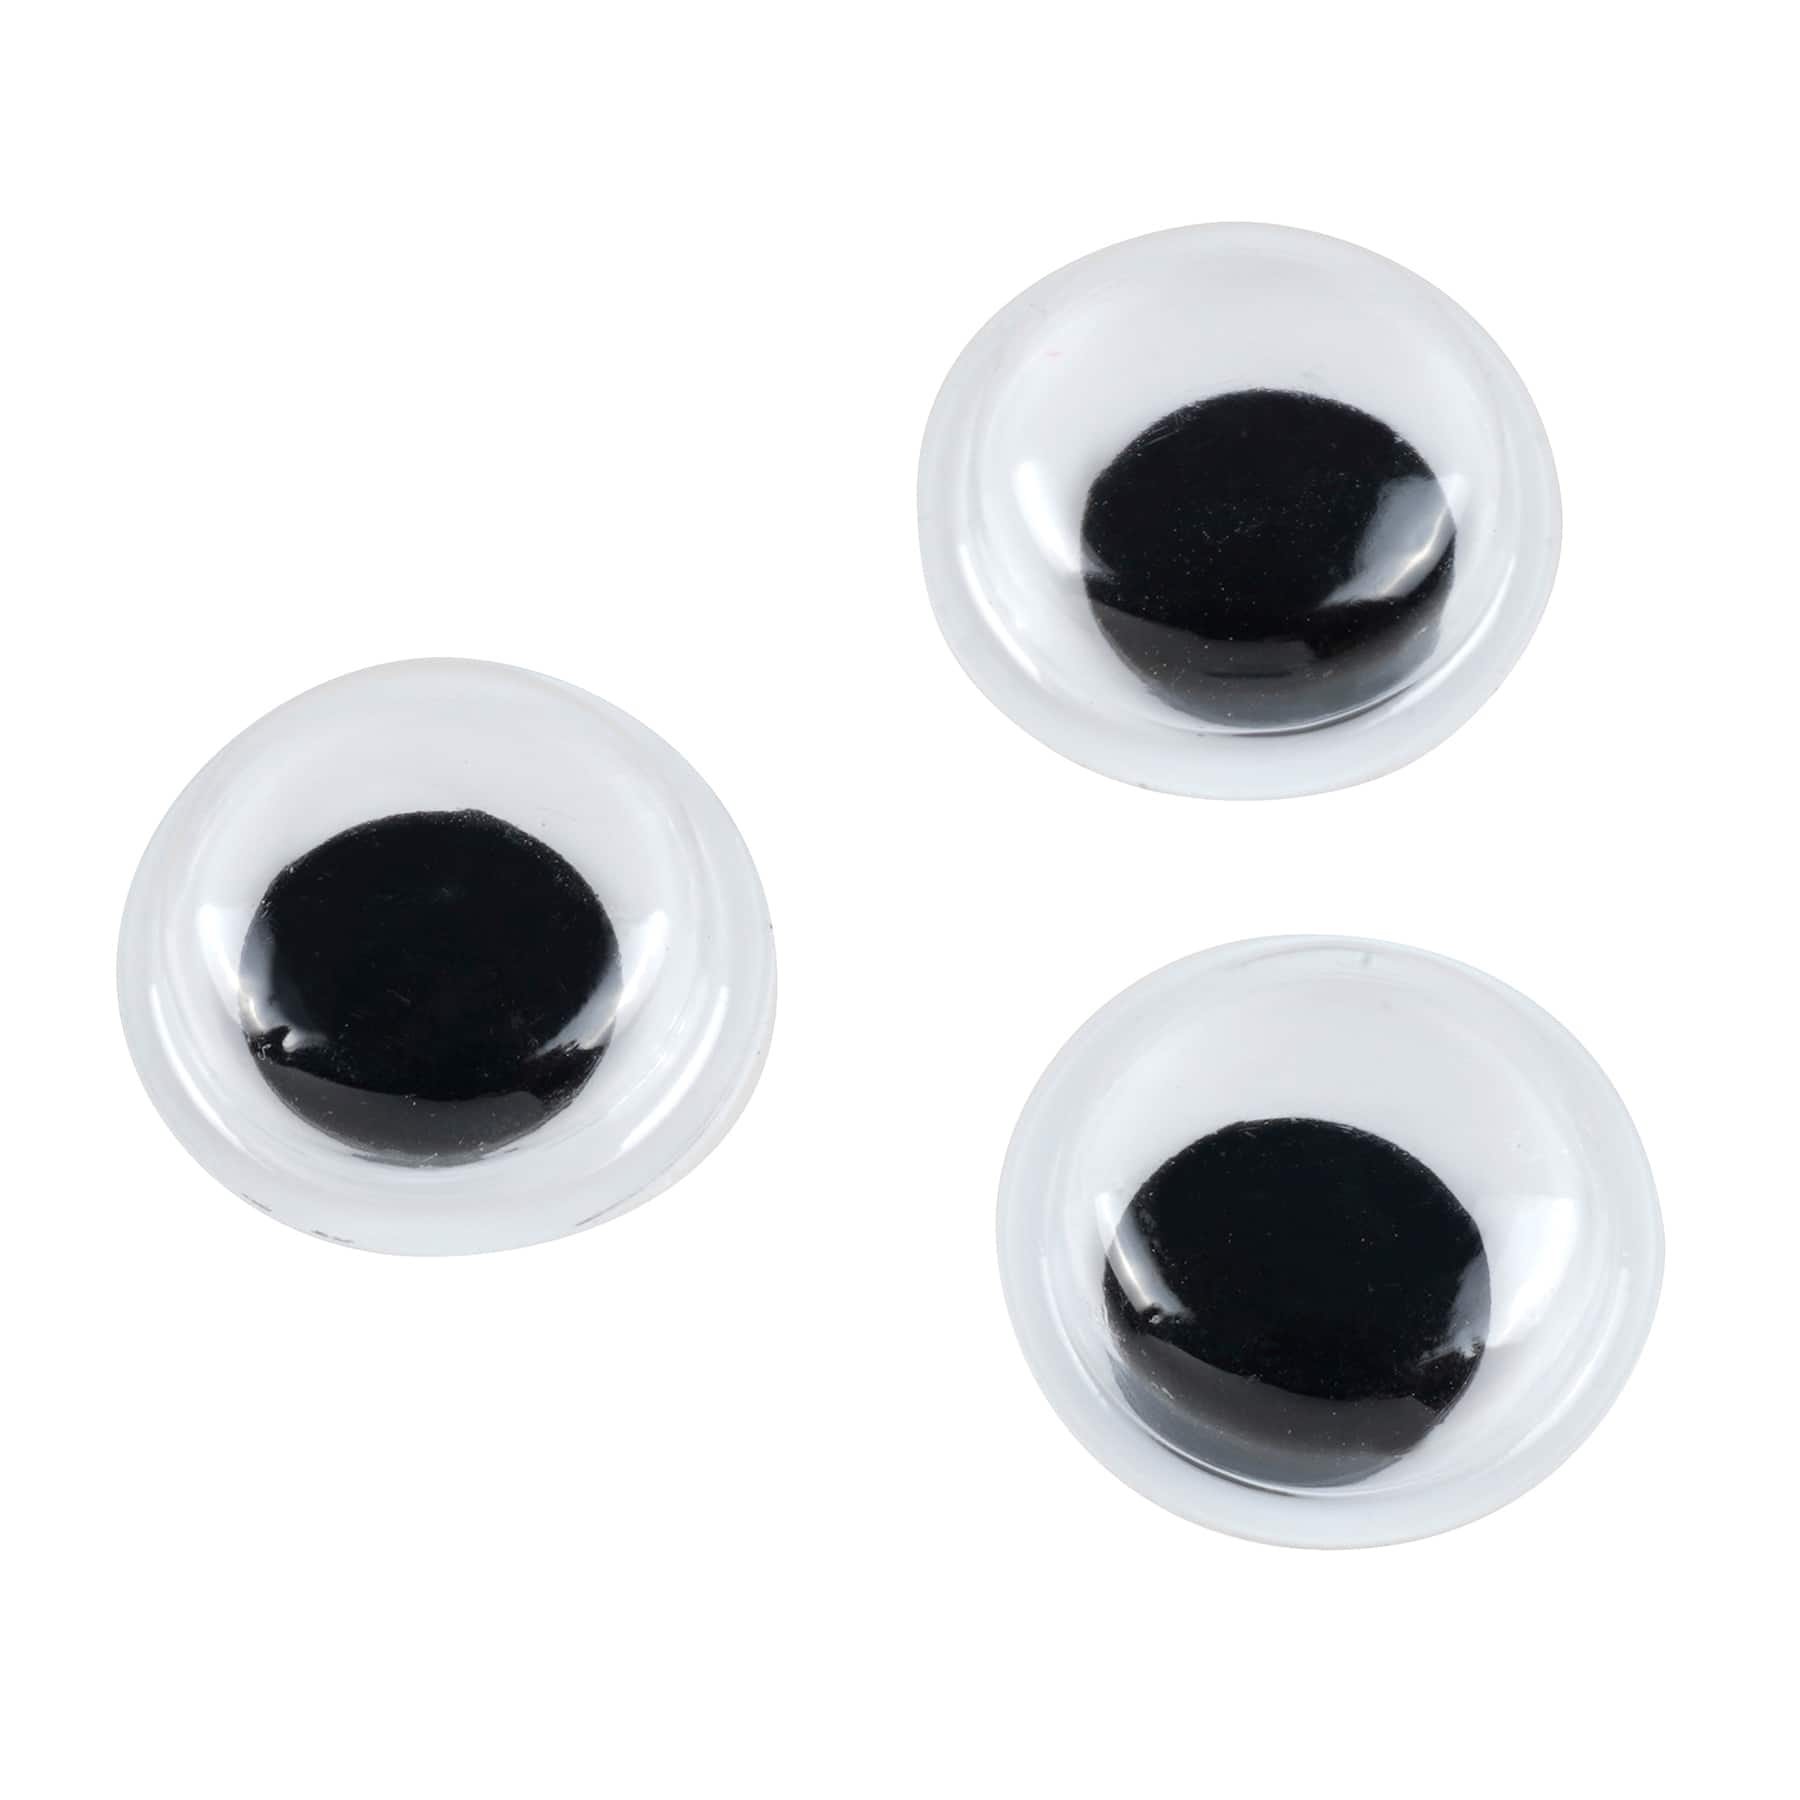 12 Packs: 118 ct. (1,416 total) 12mm Adhesive Wiggle Eyes by Creatology&#x2122;